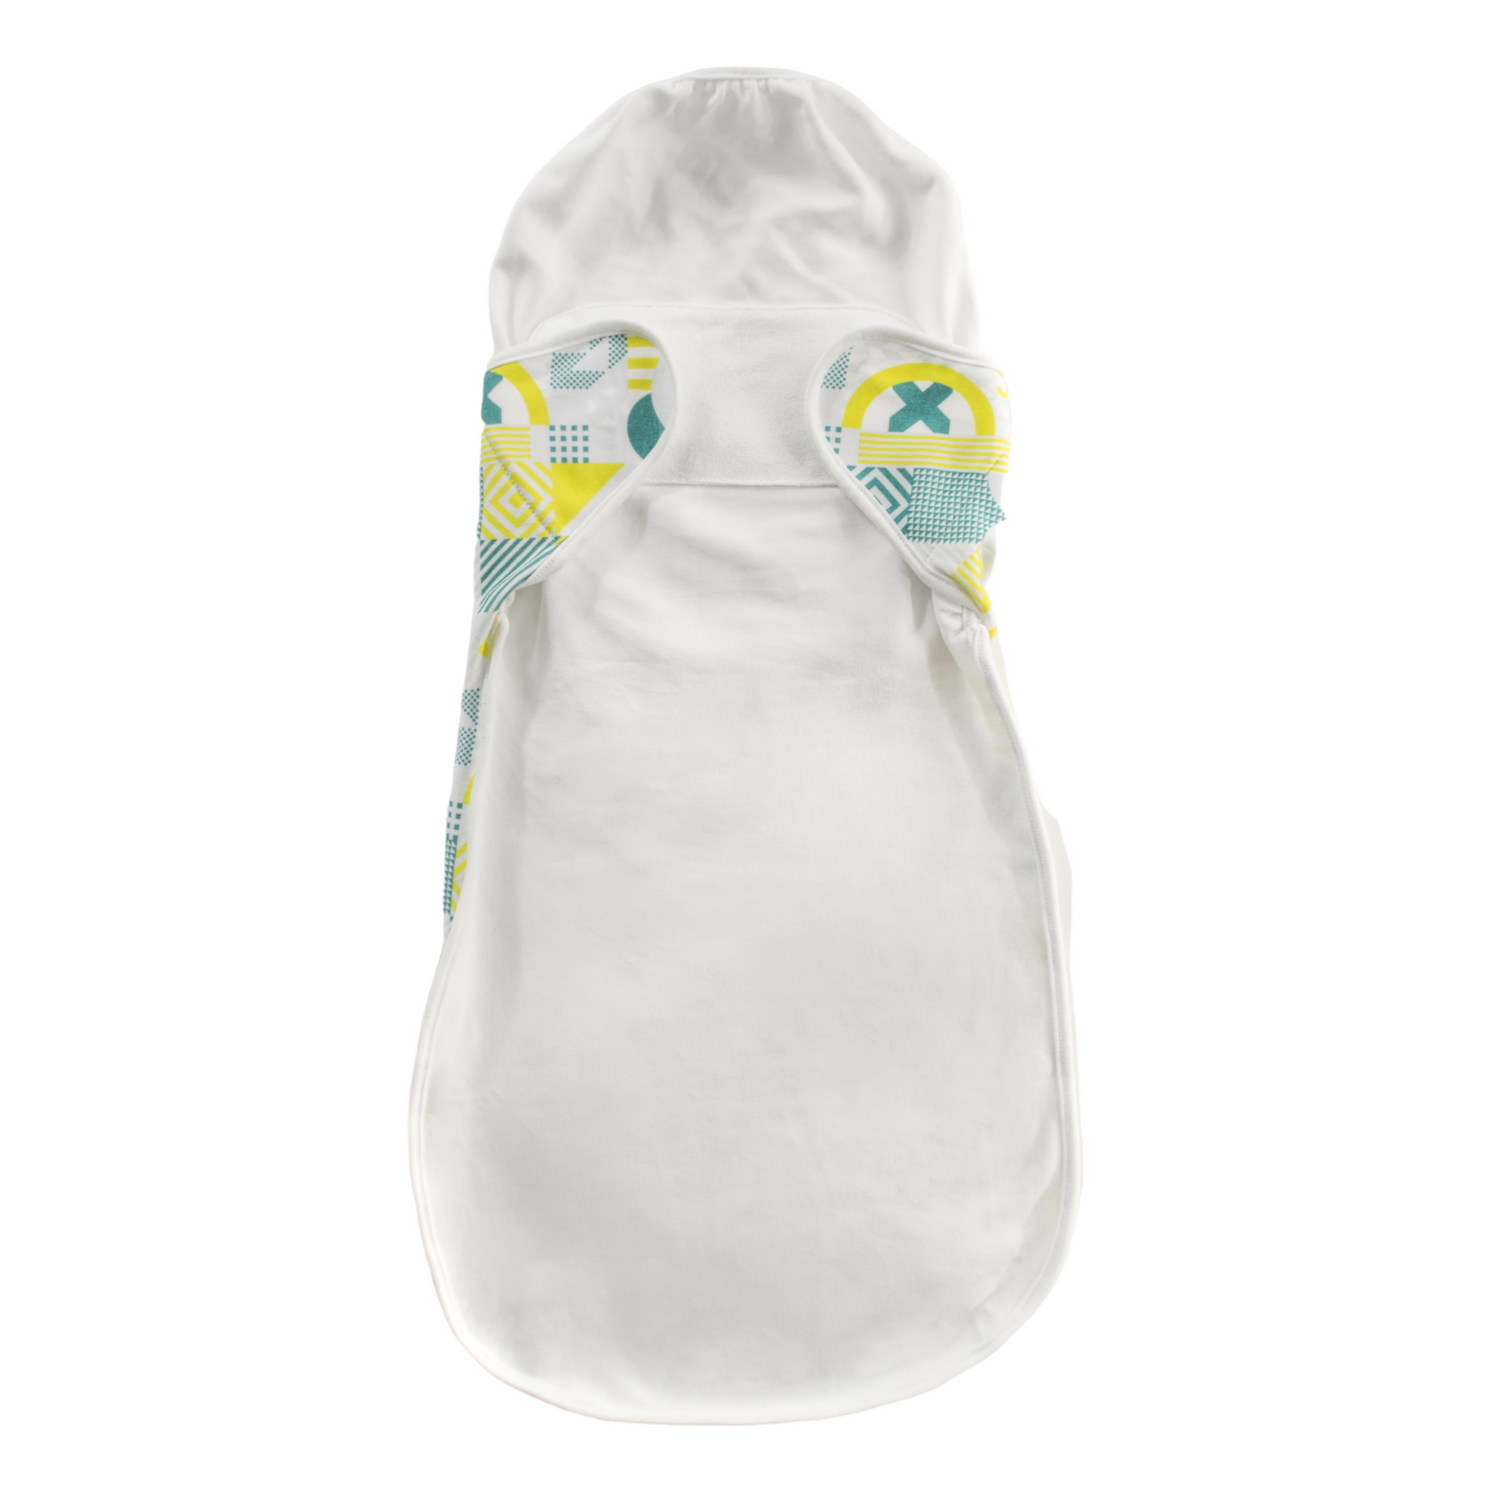 Swaddle Organic Cotton, Sky - Limited Edition